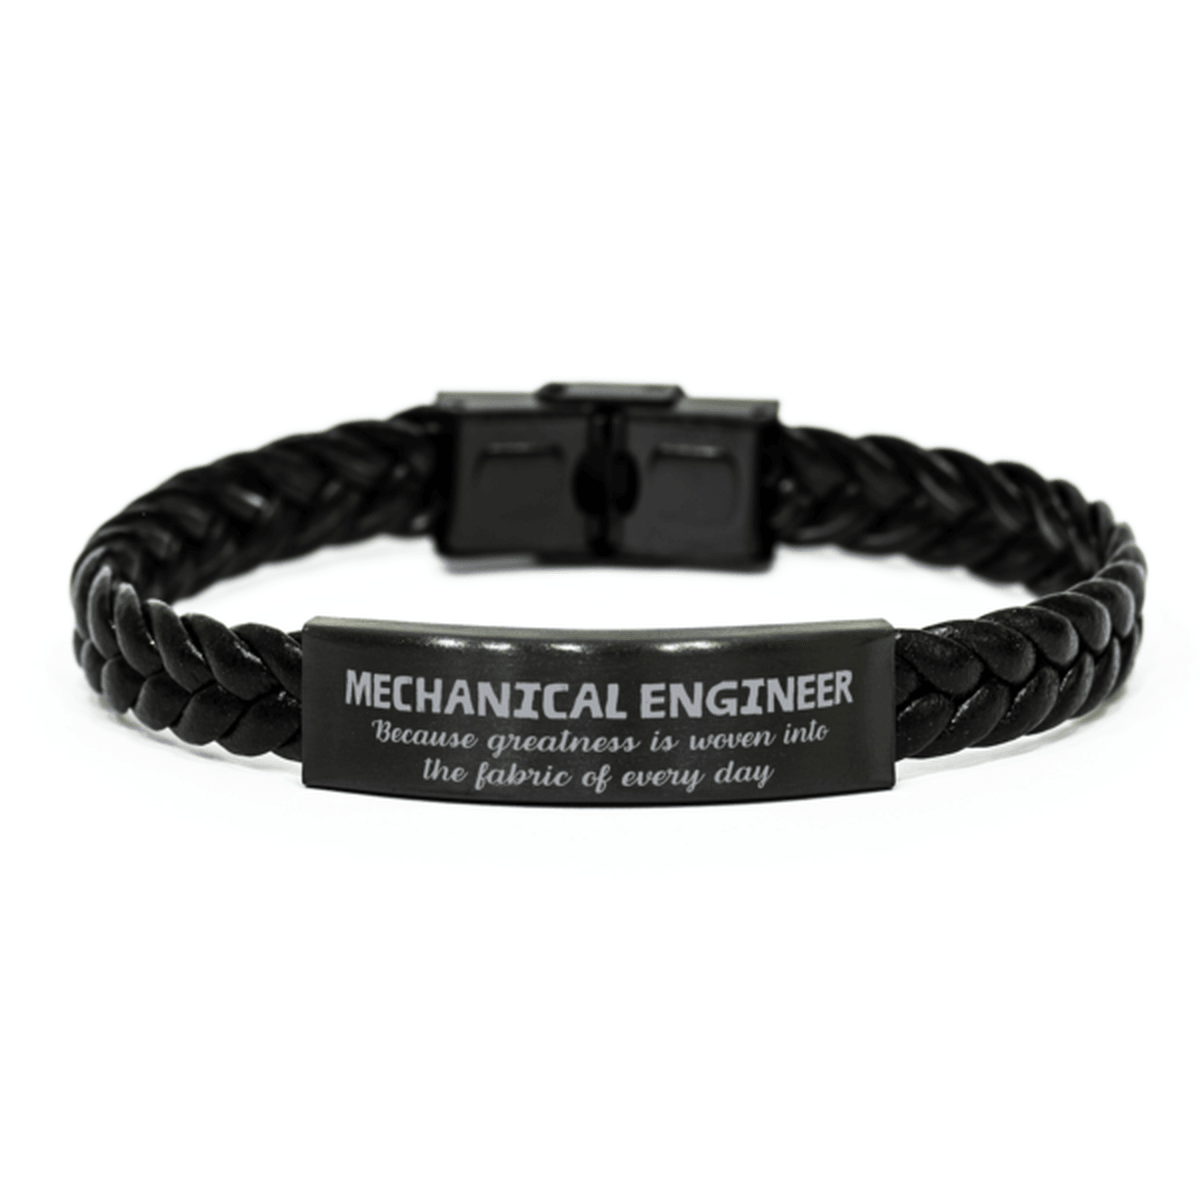 Sarcastic Mechanical Engineer Braided Leather Bracelet Gifts, Christmas Holiday Gifts for Mechanical Engineer Birthday, Mechanical Engineer: Because greatness is woven into the fabric of every day, Coworkers, Friends - Mallard Moon Gift Shop